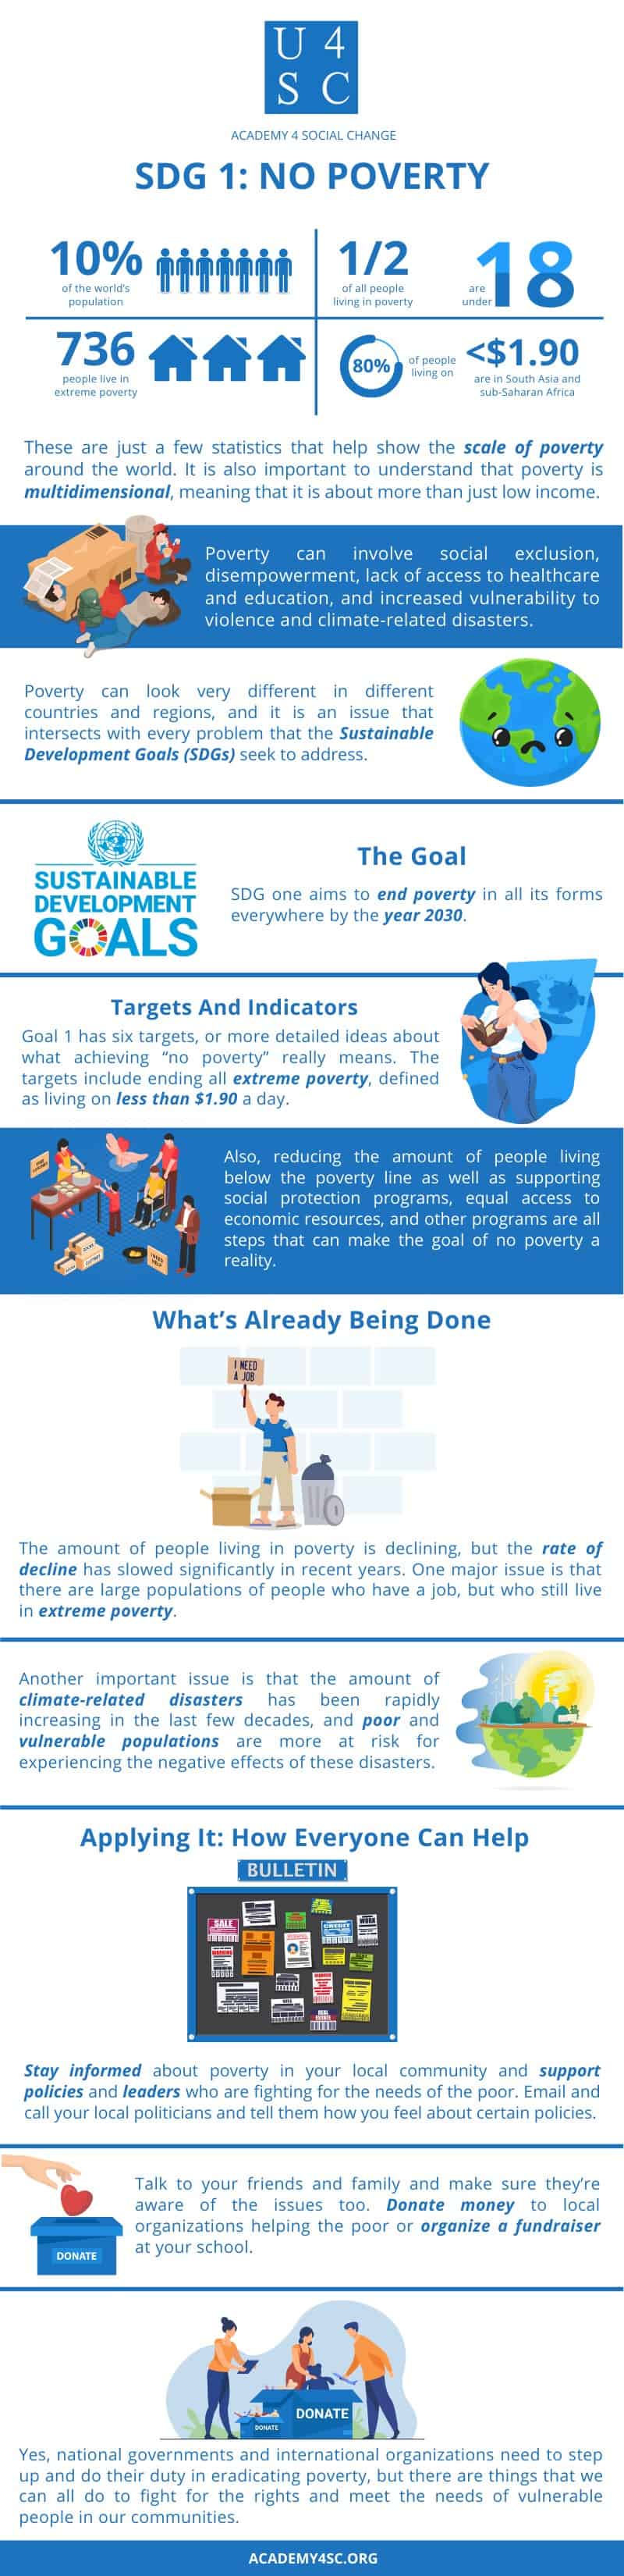 Global Goals No Poverty Facts - Infoupdate.org